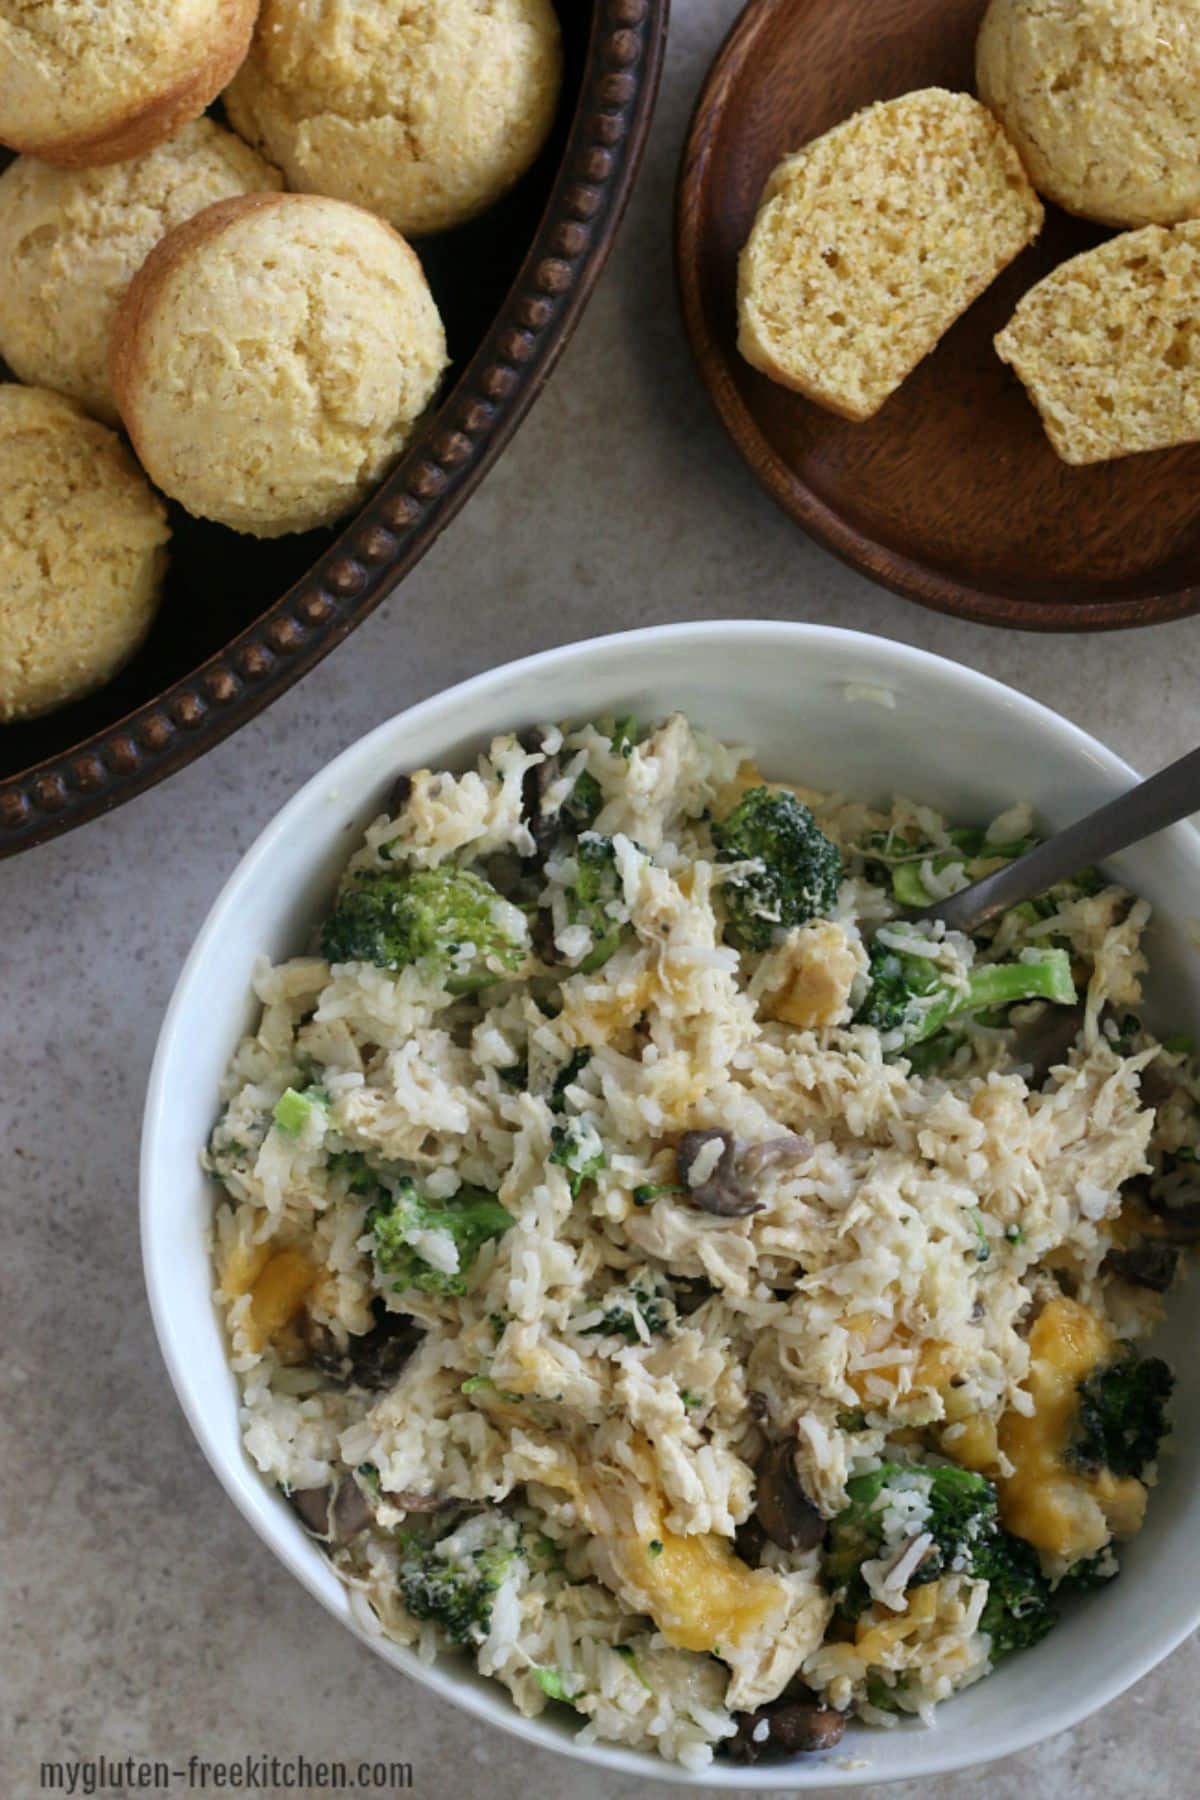 Gluten-free Chicken Broccoli Rice in a white bowl with a spoon.